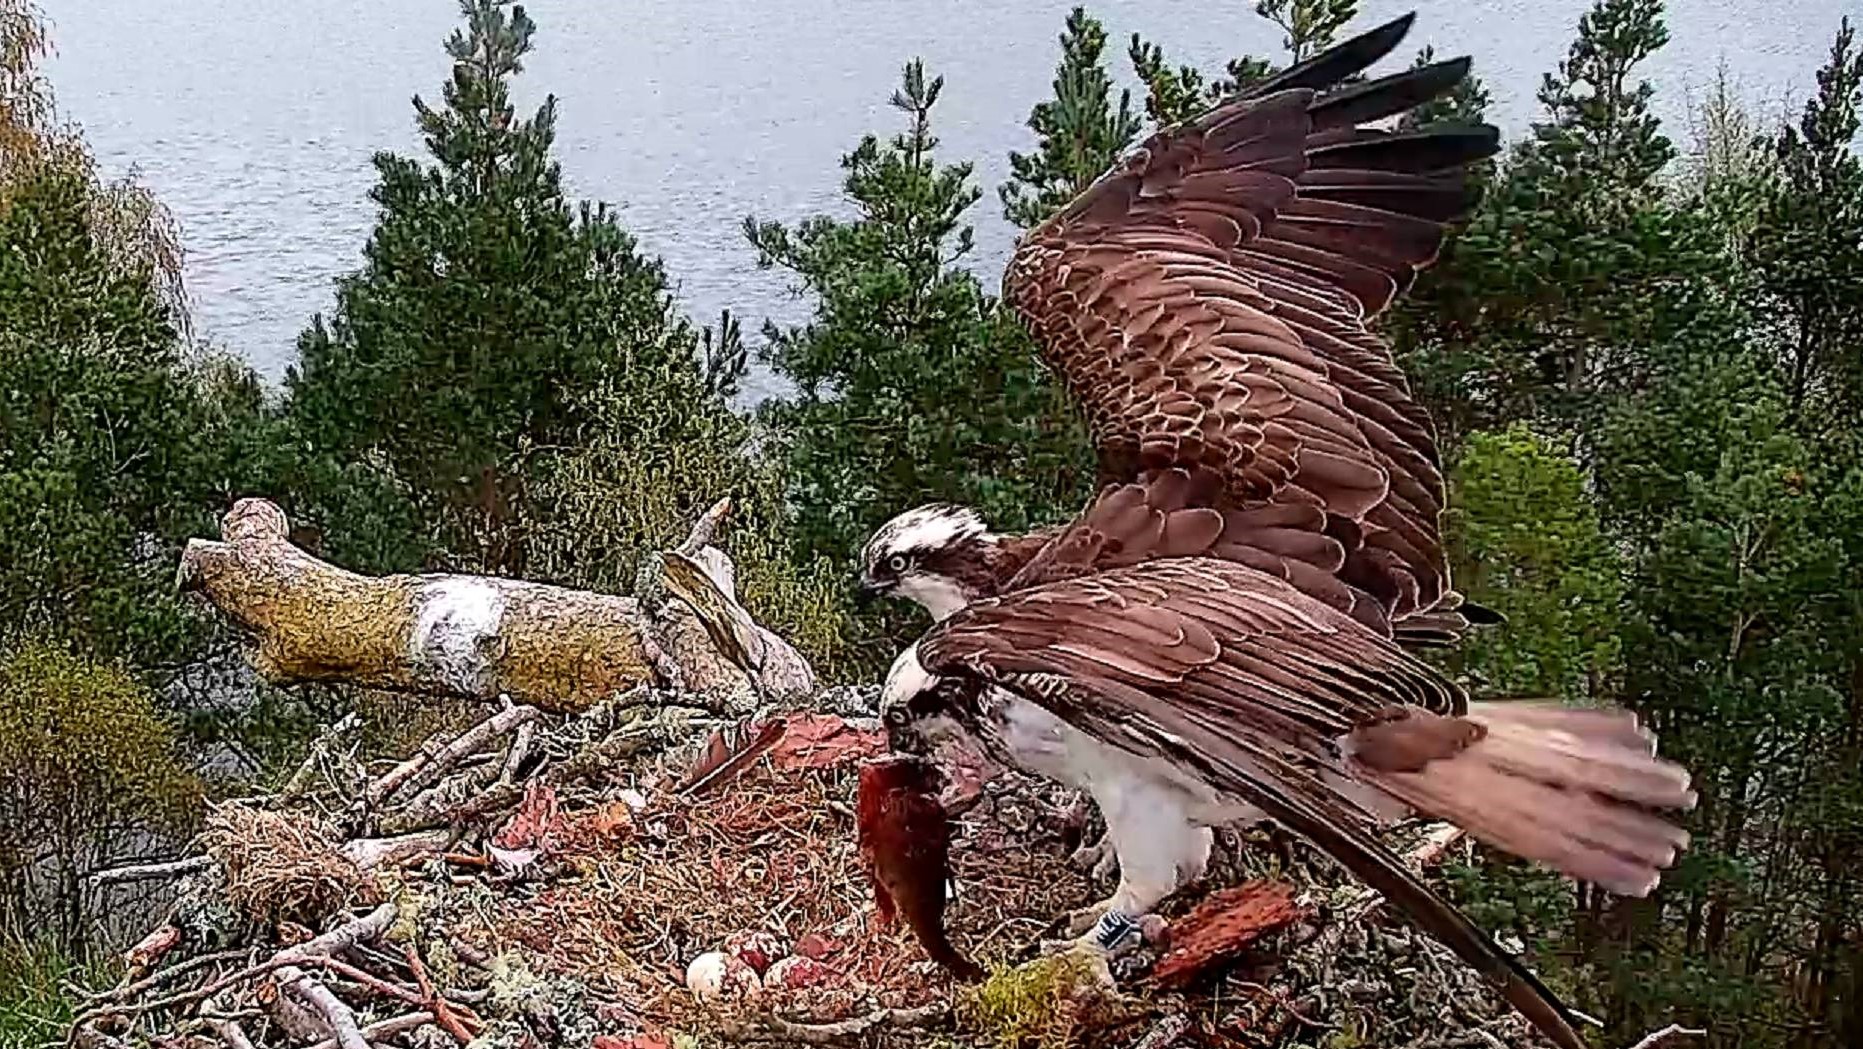 NC0 holds a perch in her beak just after LM12 delivers it to the nest.